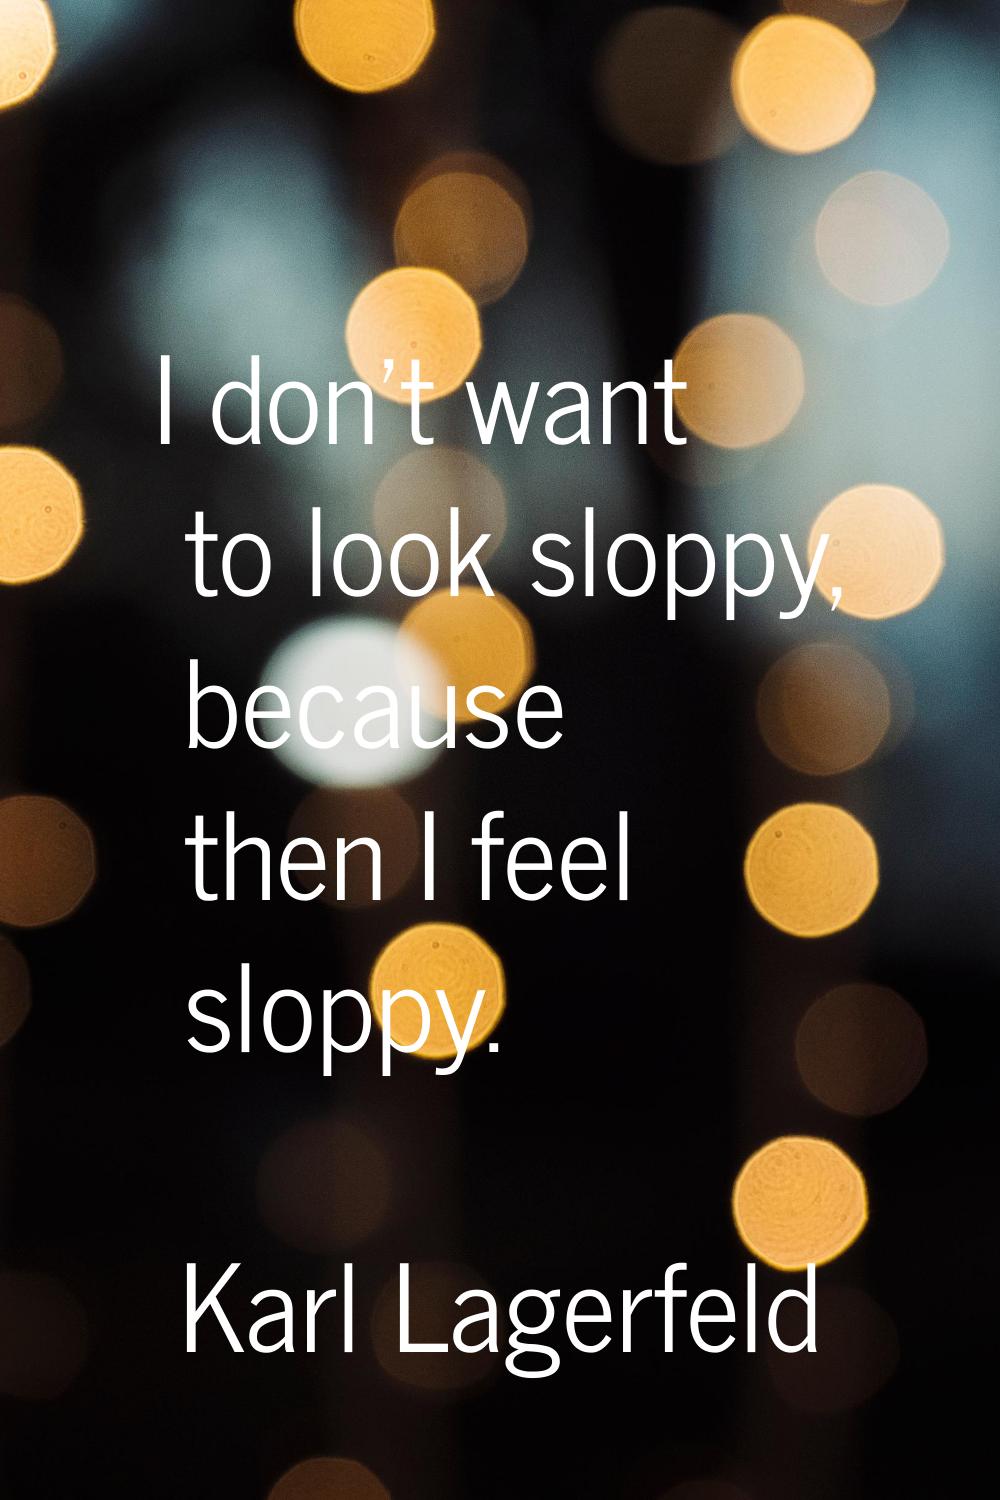 I don't want to look sloppy, because then I feel sloppy.